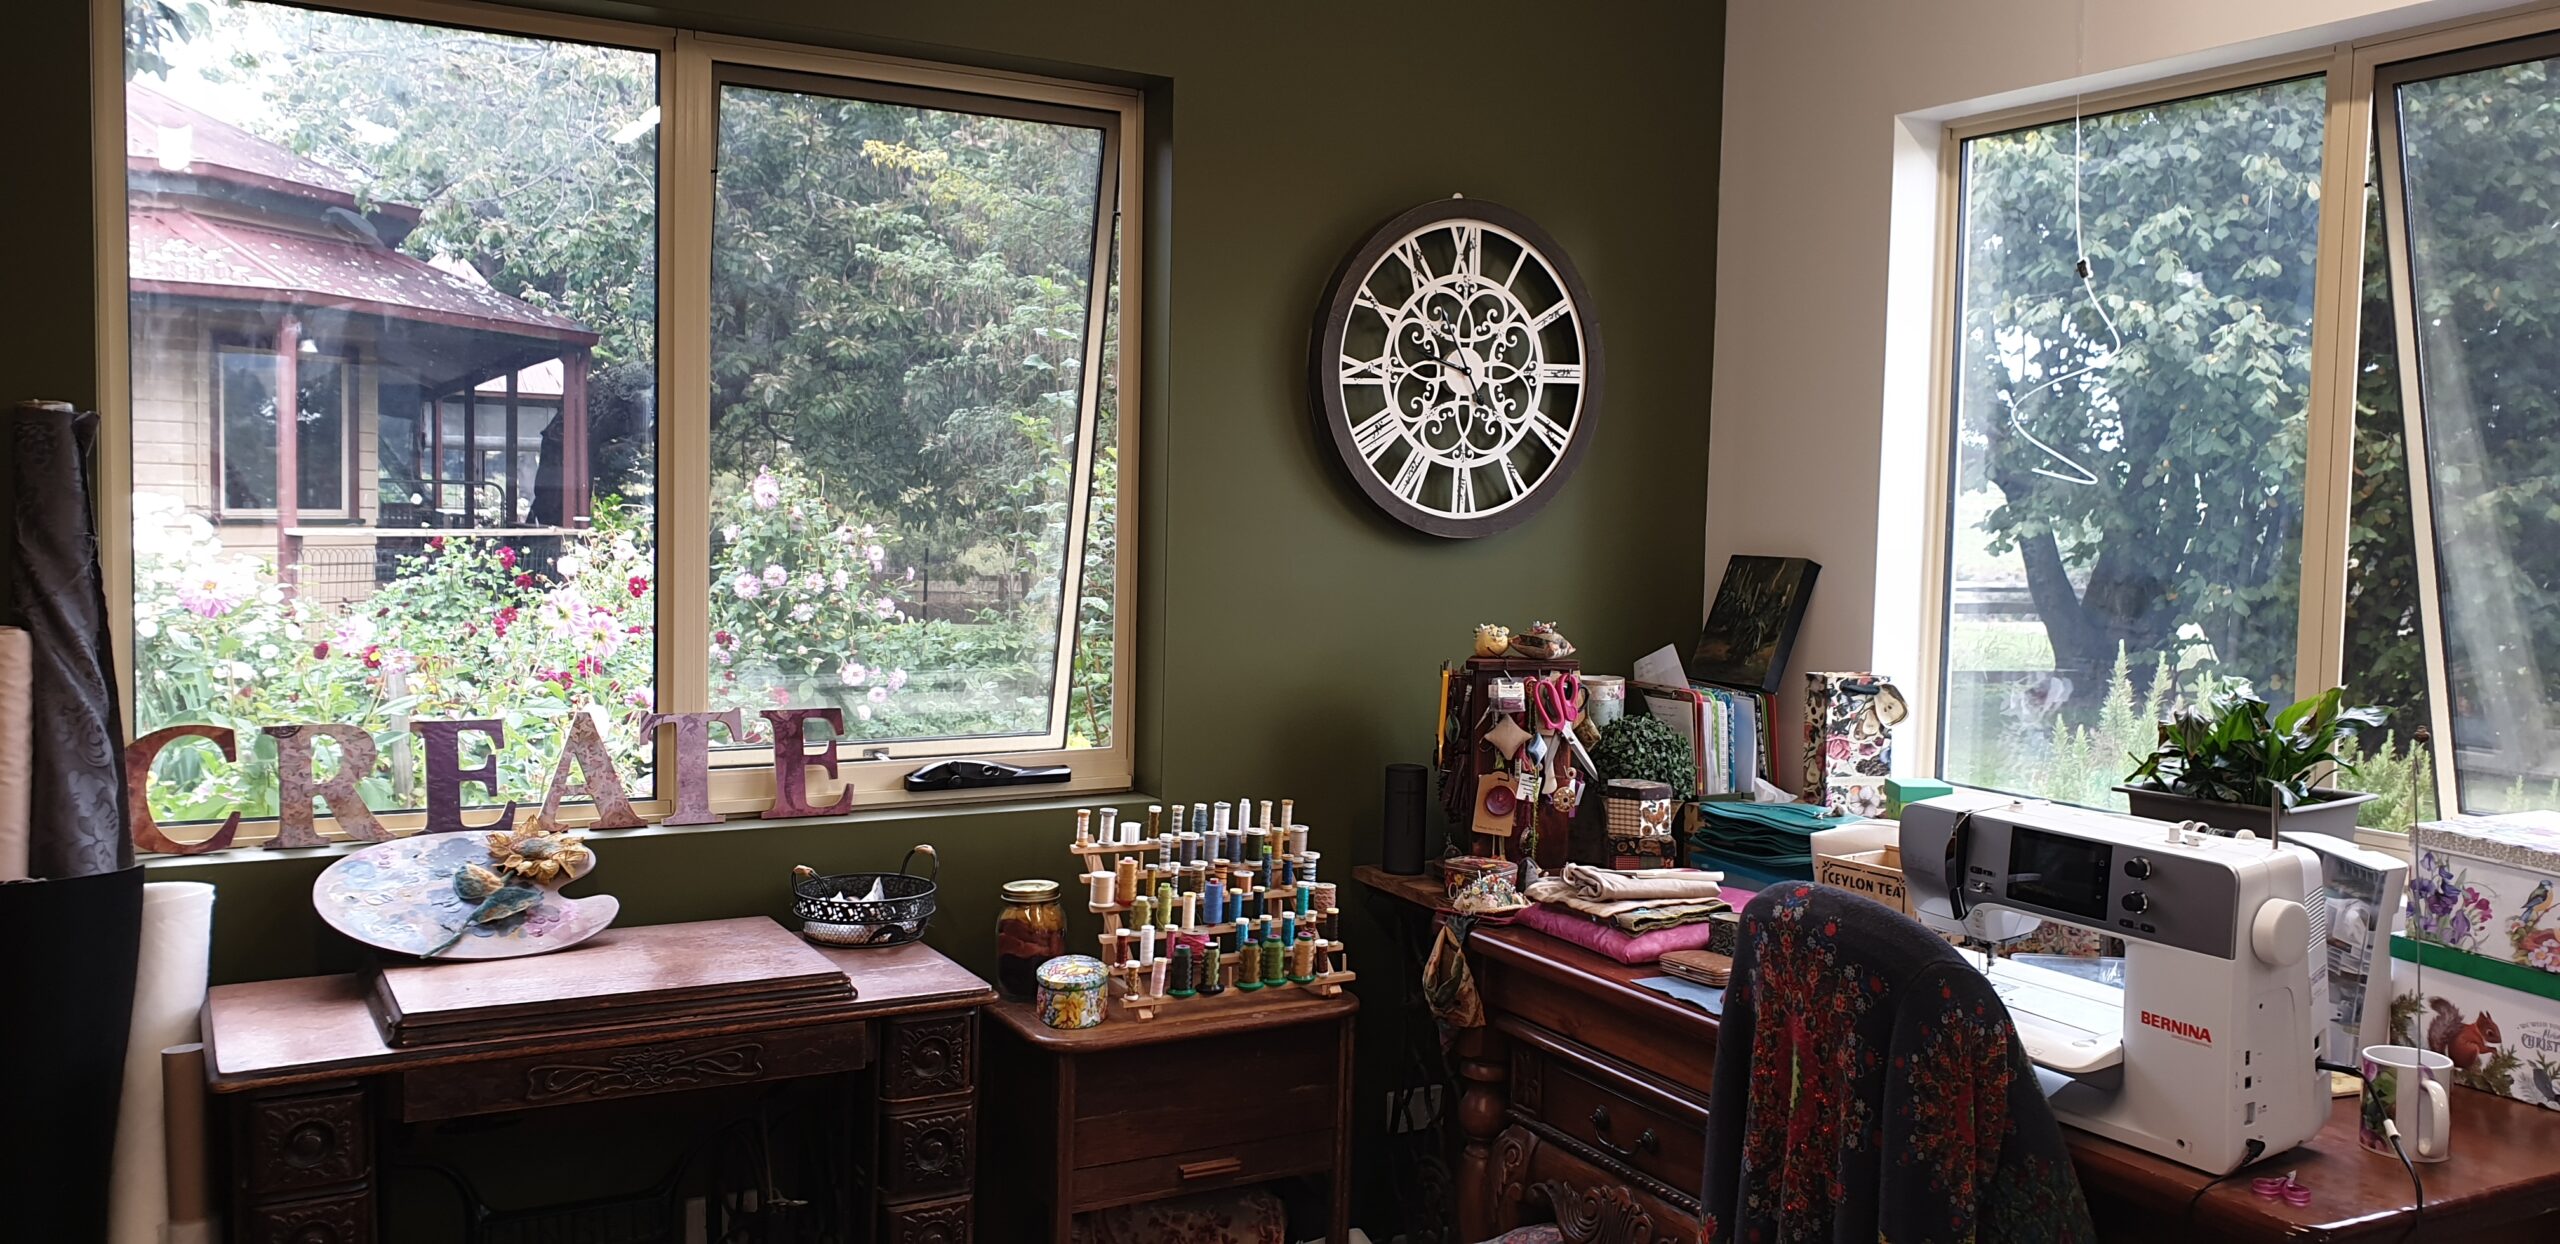 Image shows studio corner for Cindy Thompson for her Artist Profile with Art Trails Tasmania